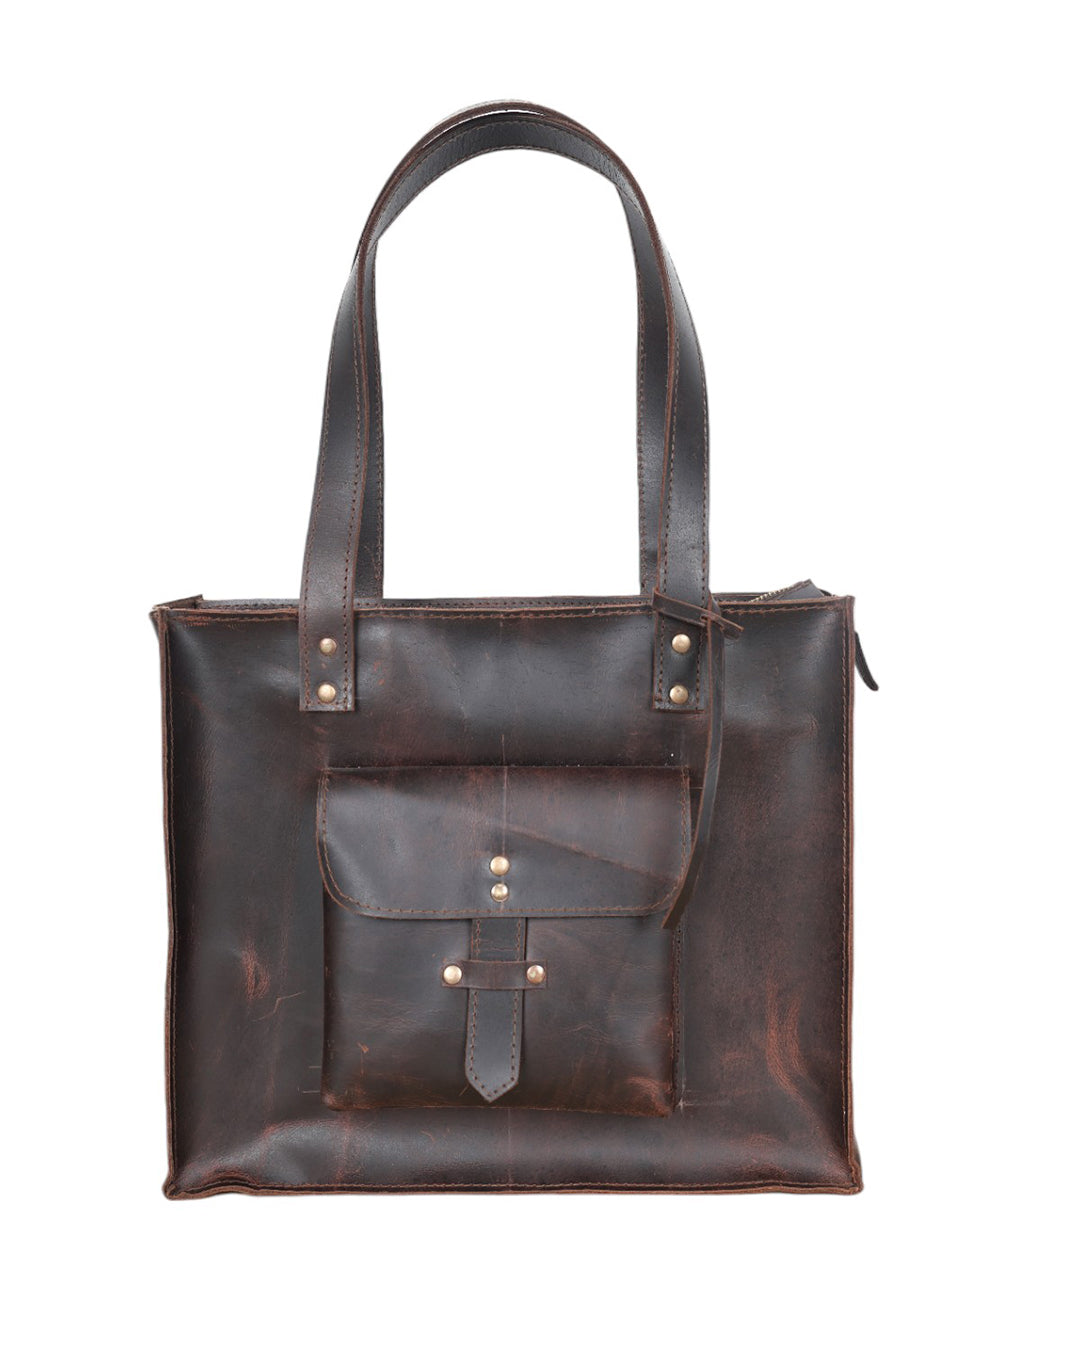 Tote Bag with Laptop Pocket